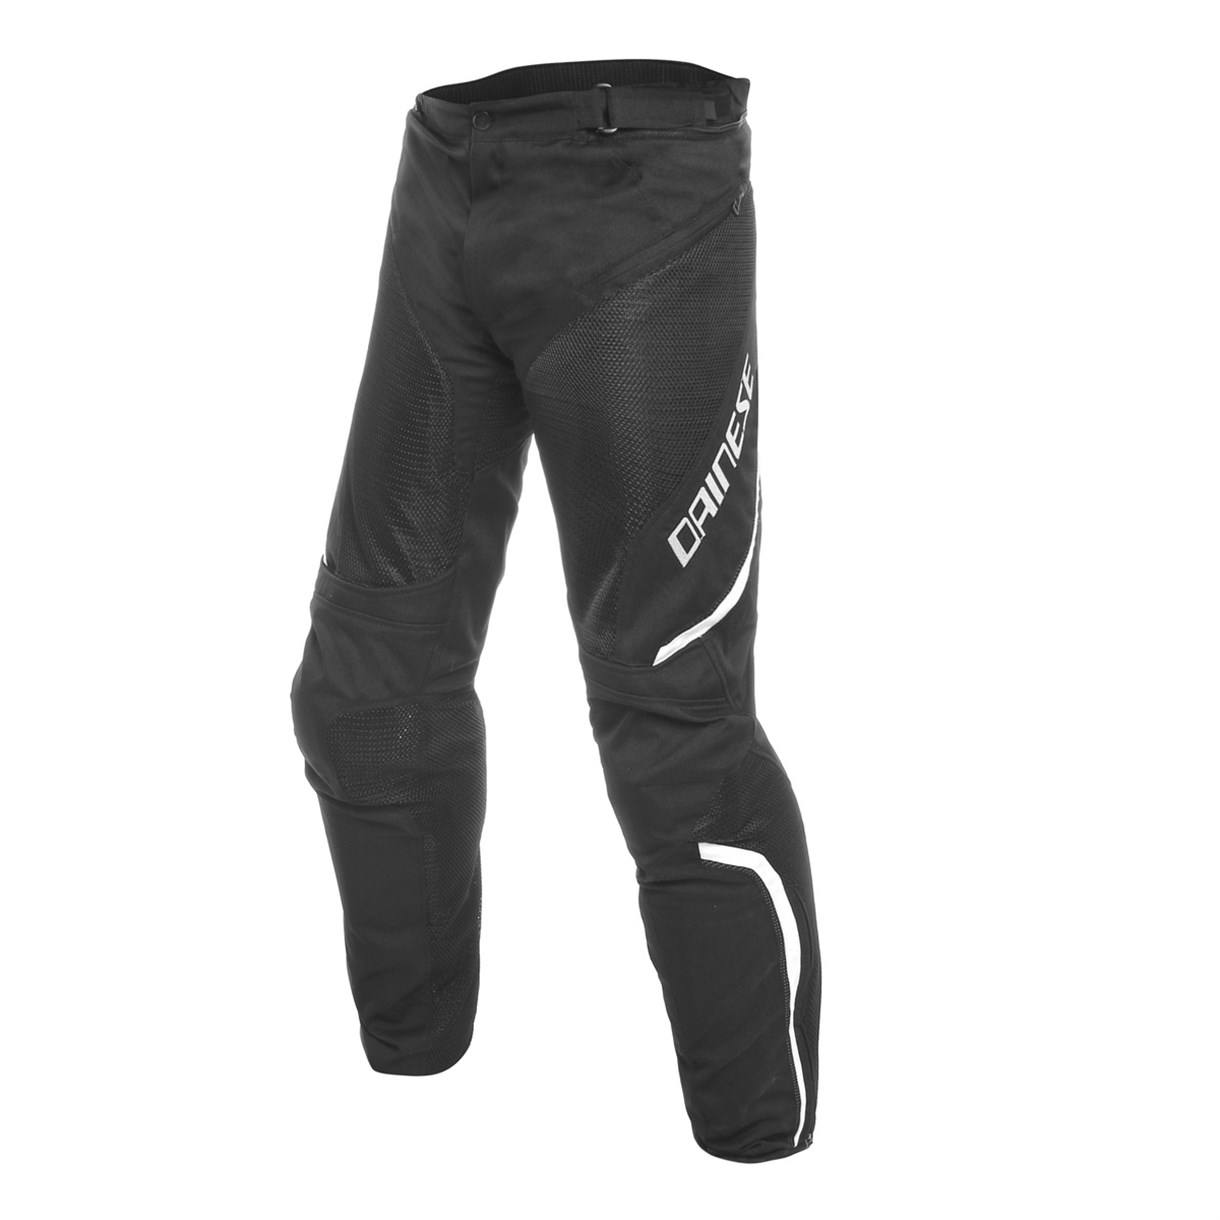 Dainese Dainese Drake Air D Dry Size 48H Men's Motorcycle Waterproof Pants Black White 